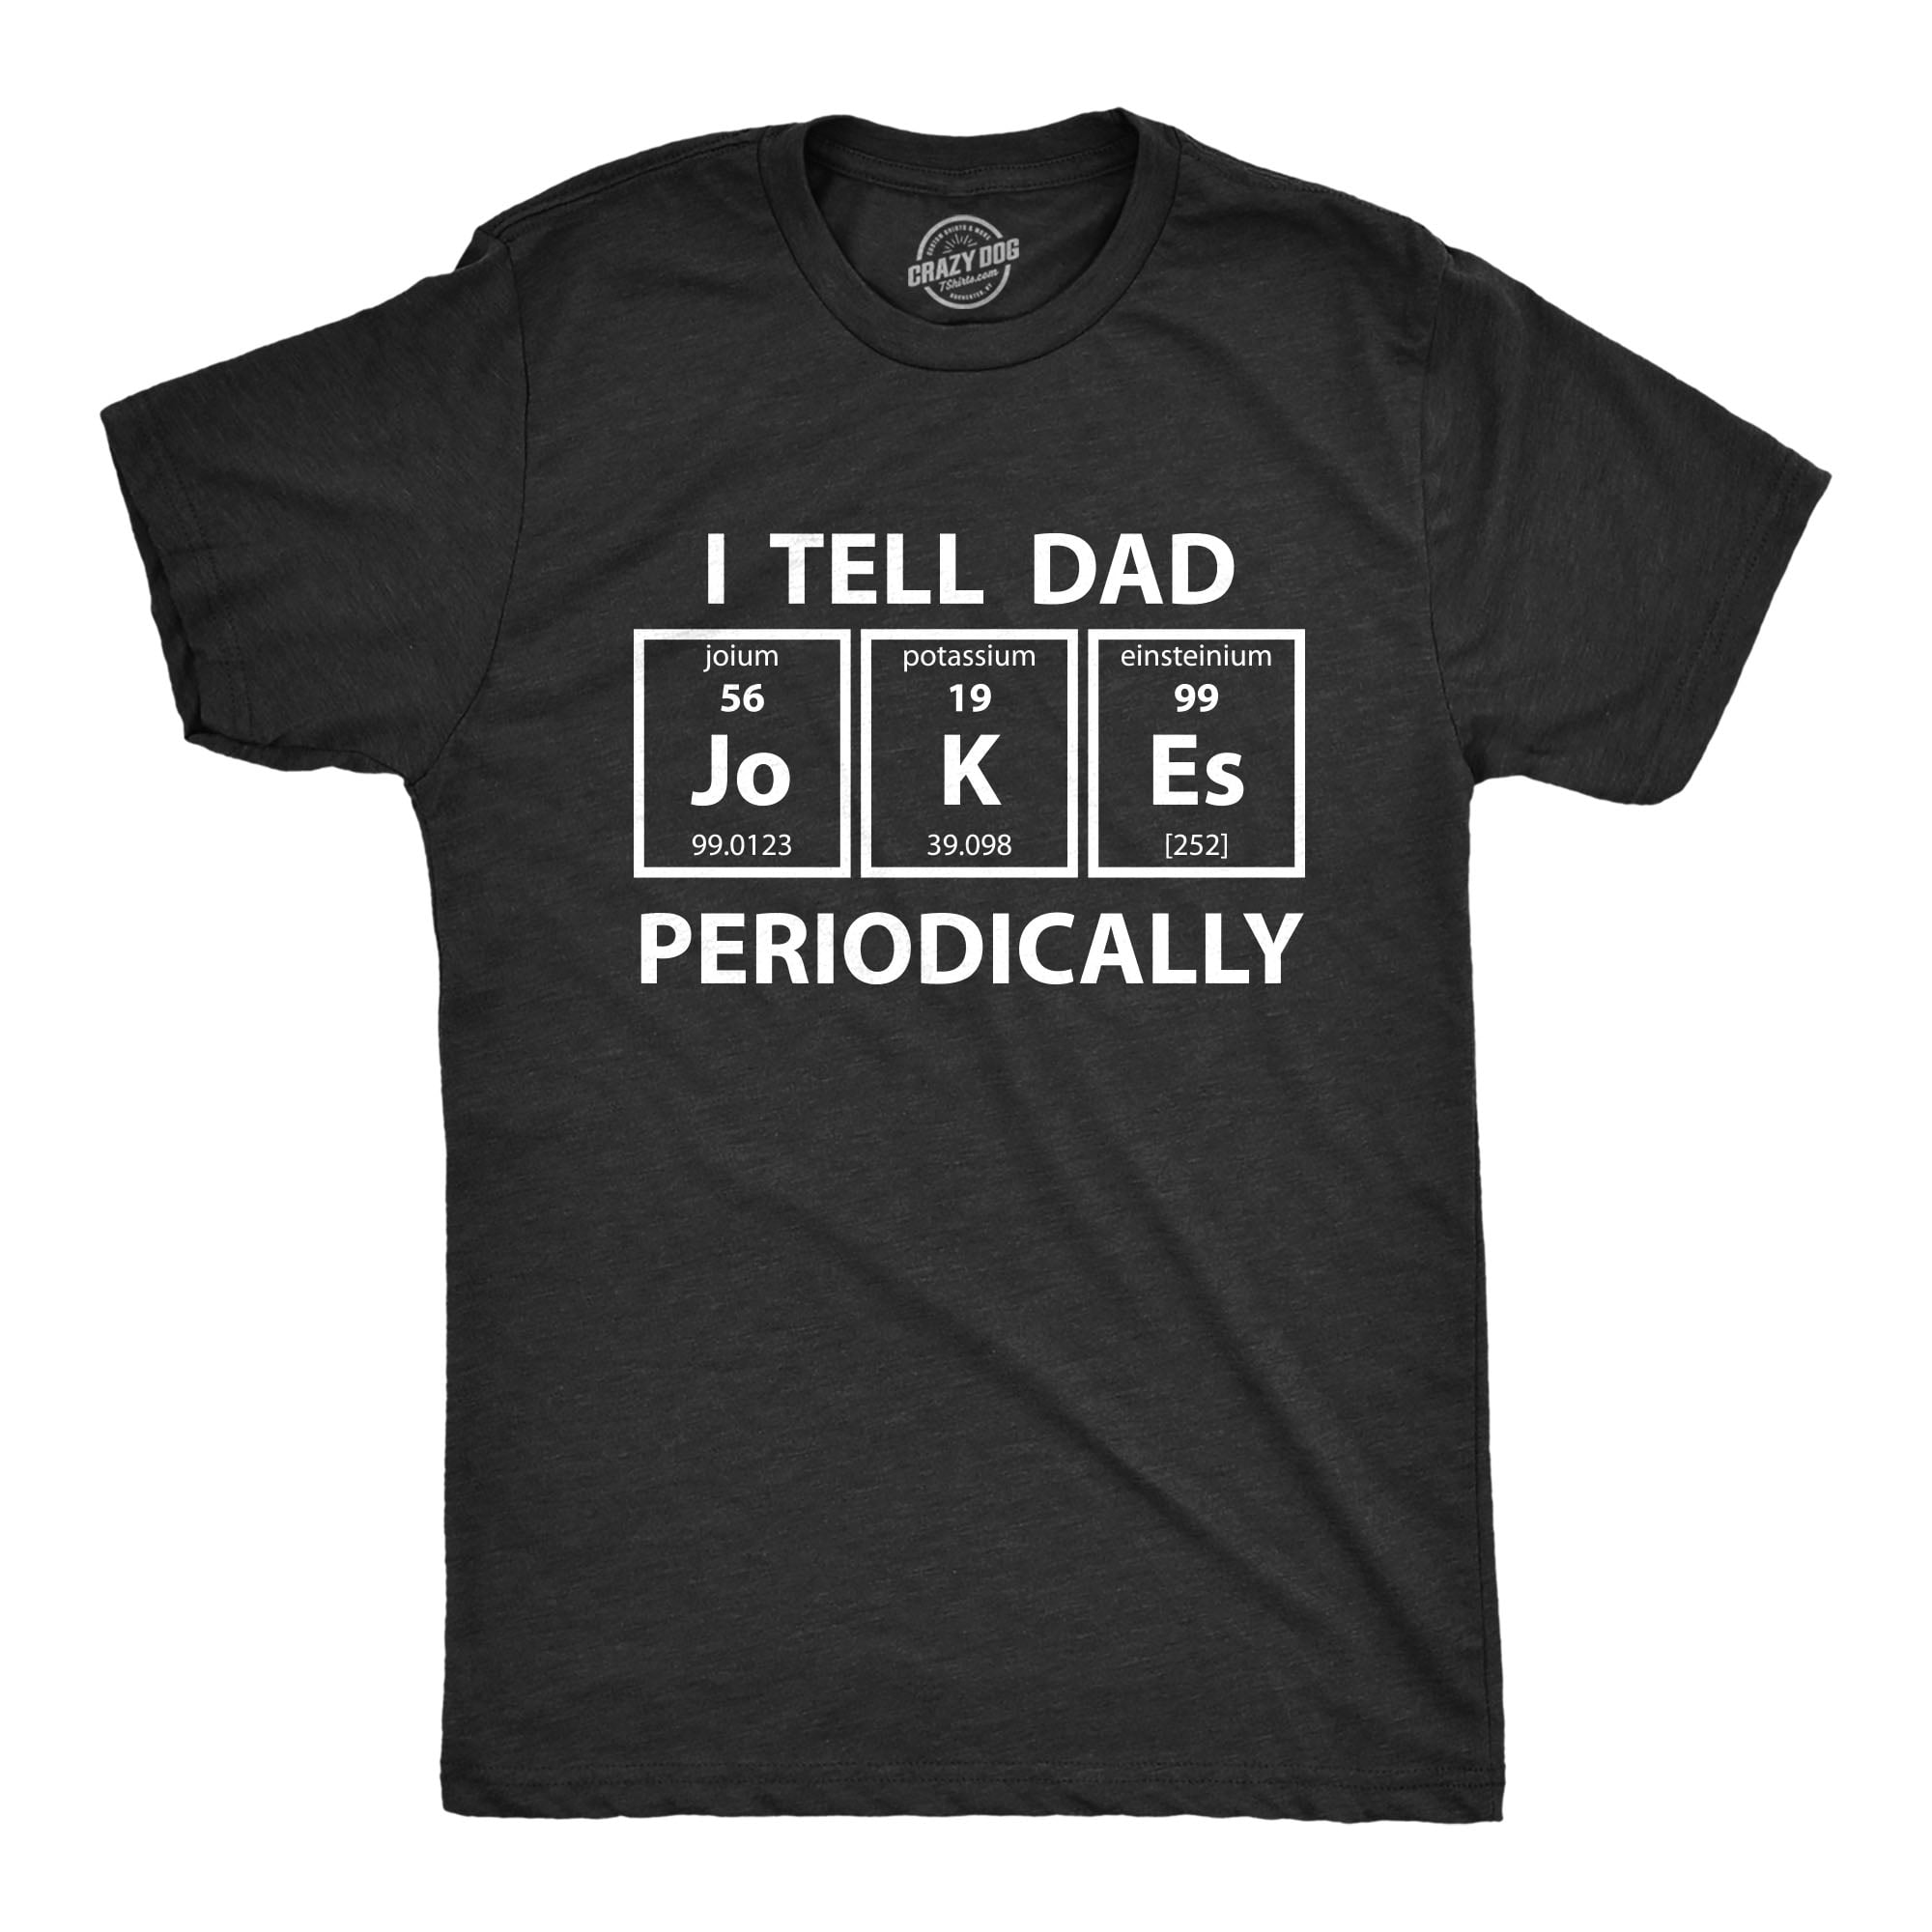 Crazy Dog Tshirts Mens I Tell Dad Jokes Periodically Tshirt Funny Science Fathers Day Nerdy Graphi 